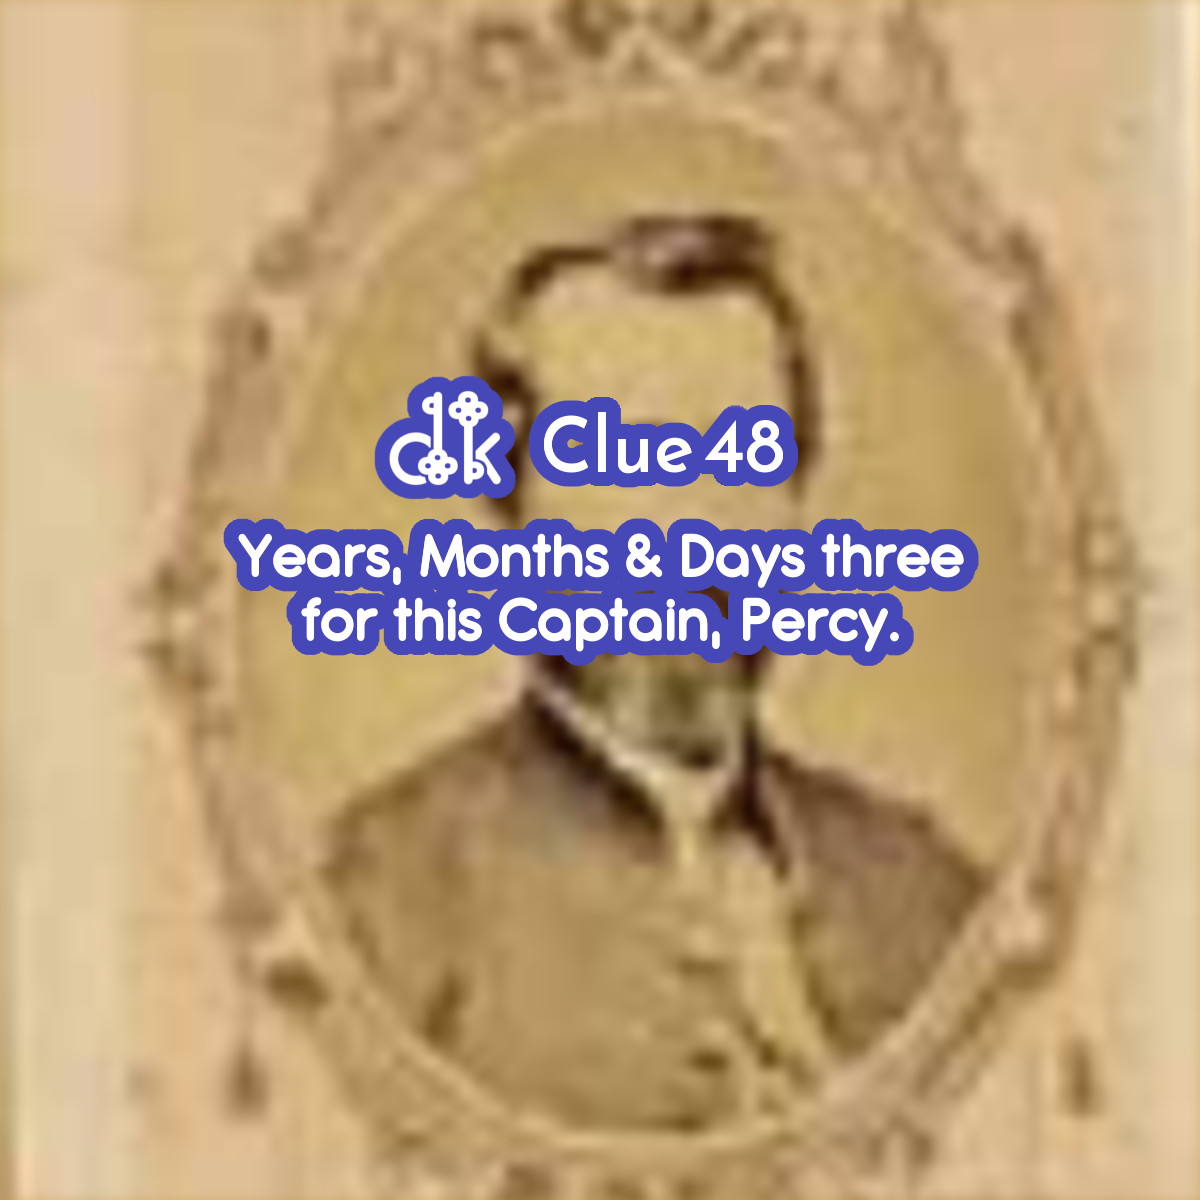 Clue #48 - Years, Months & Days three for this Captain, Percy.